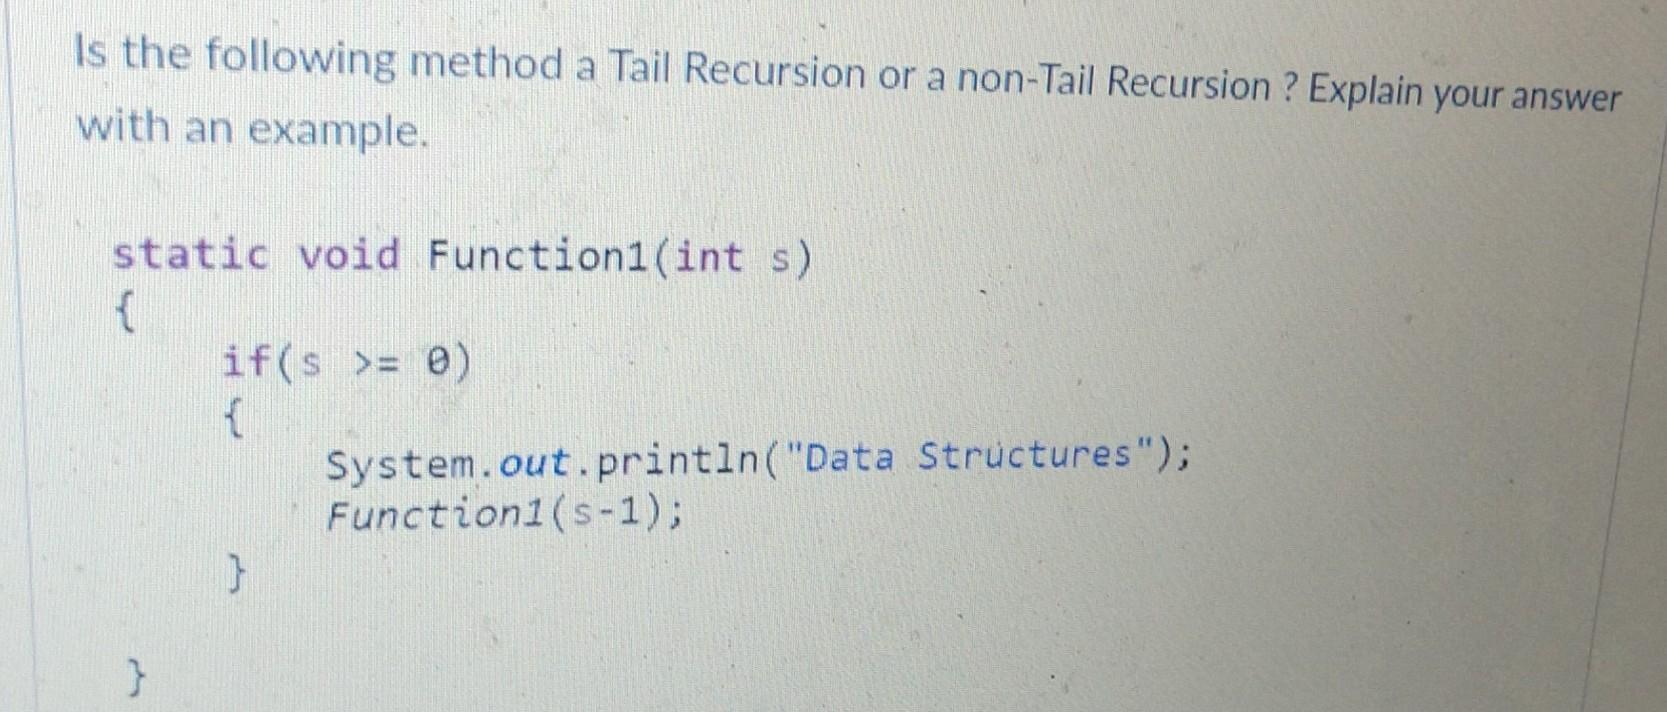 Is the following method a Tail Recursion or a non-Tail Recursion ? Explain your answer with an example.